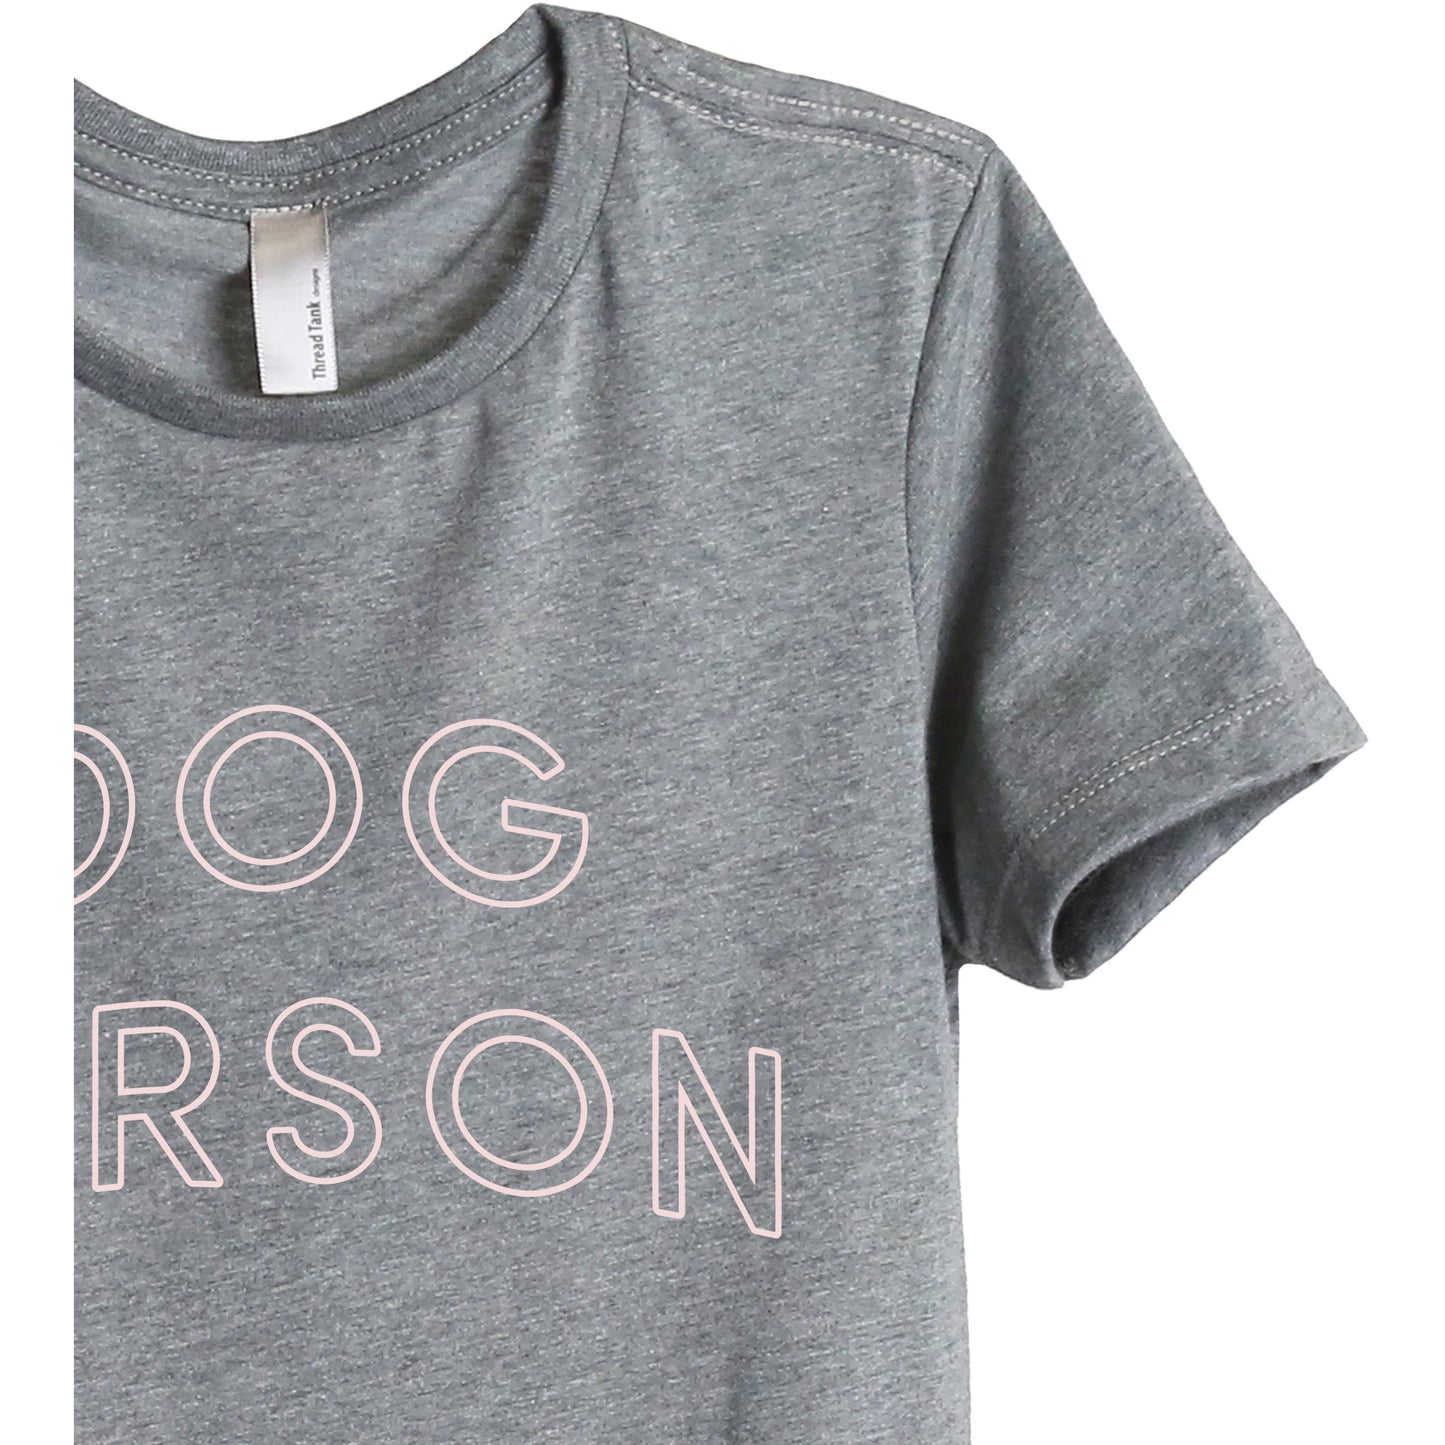 Dog Person Women's Relaxed Crewneck T-Shirt Top Tee Heather Grey Zoom Details
